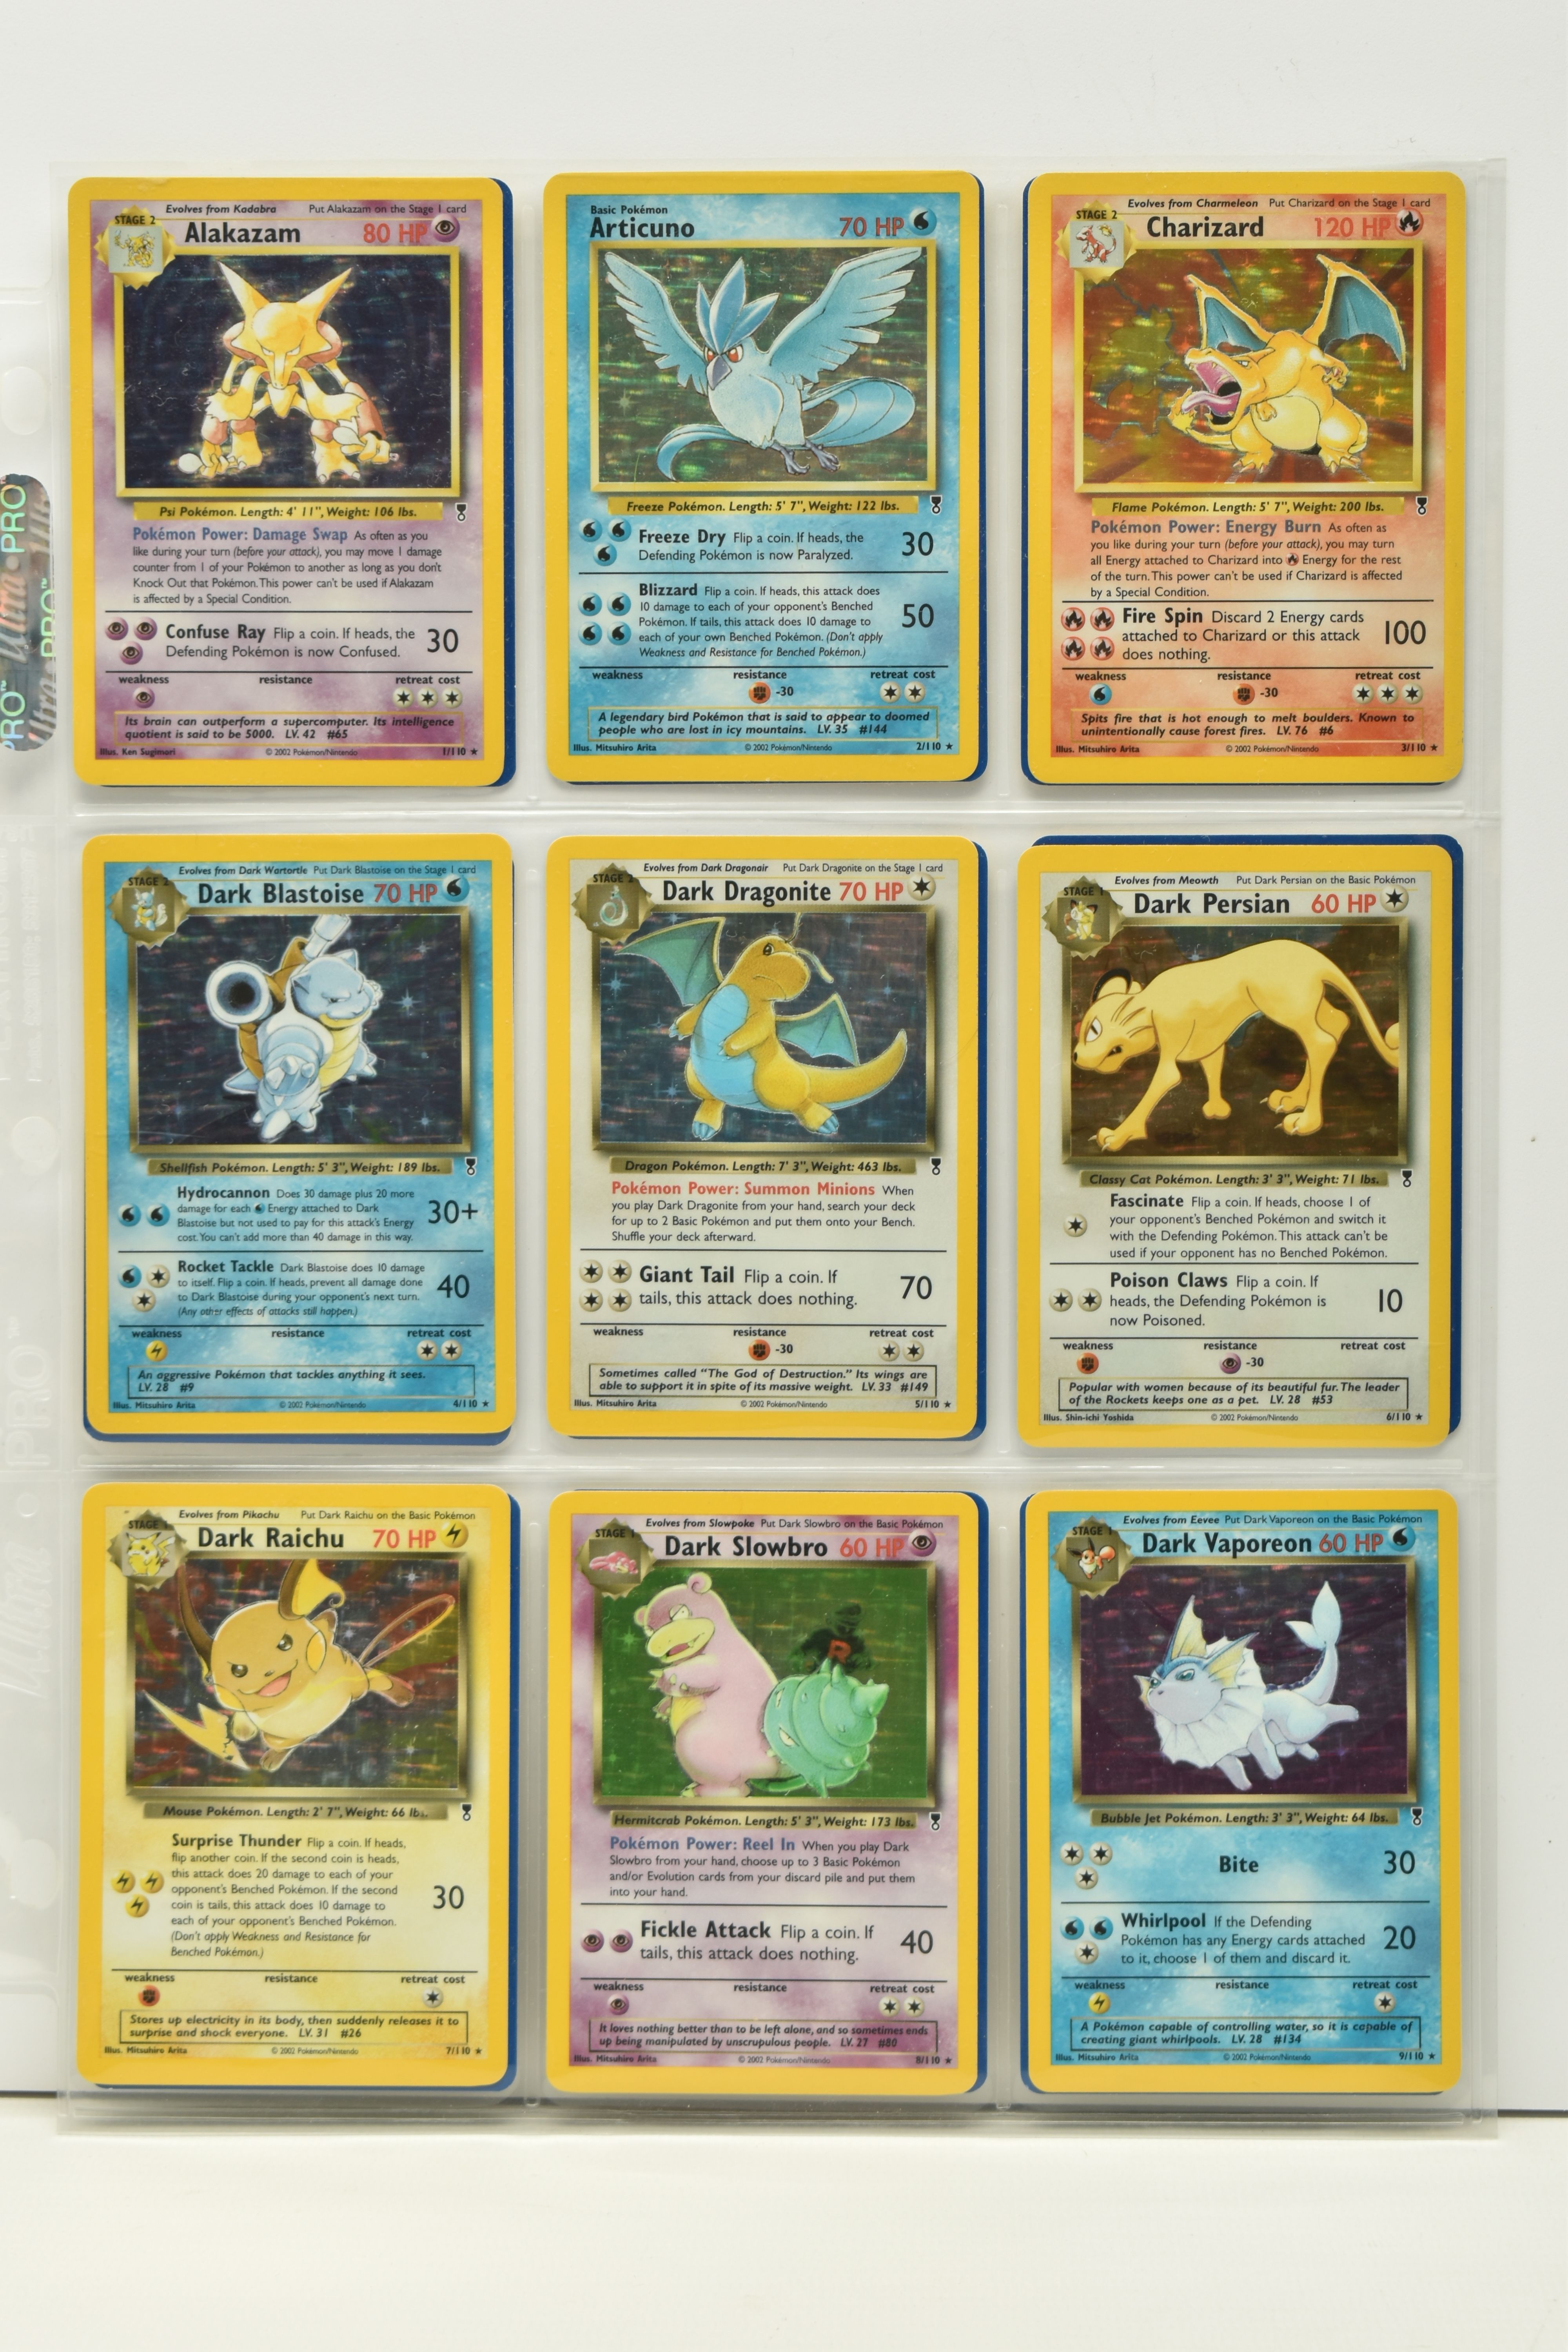 POKEMON COMPLETE LEGENDARY COLLECTION MASTER SET, all cards are present, including their reverse